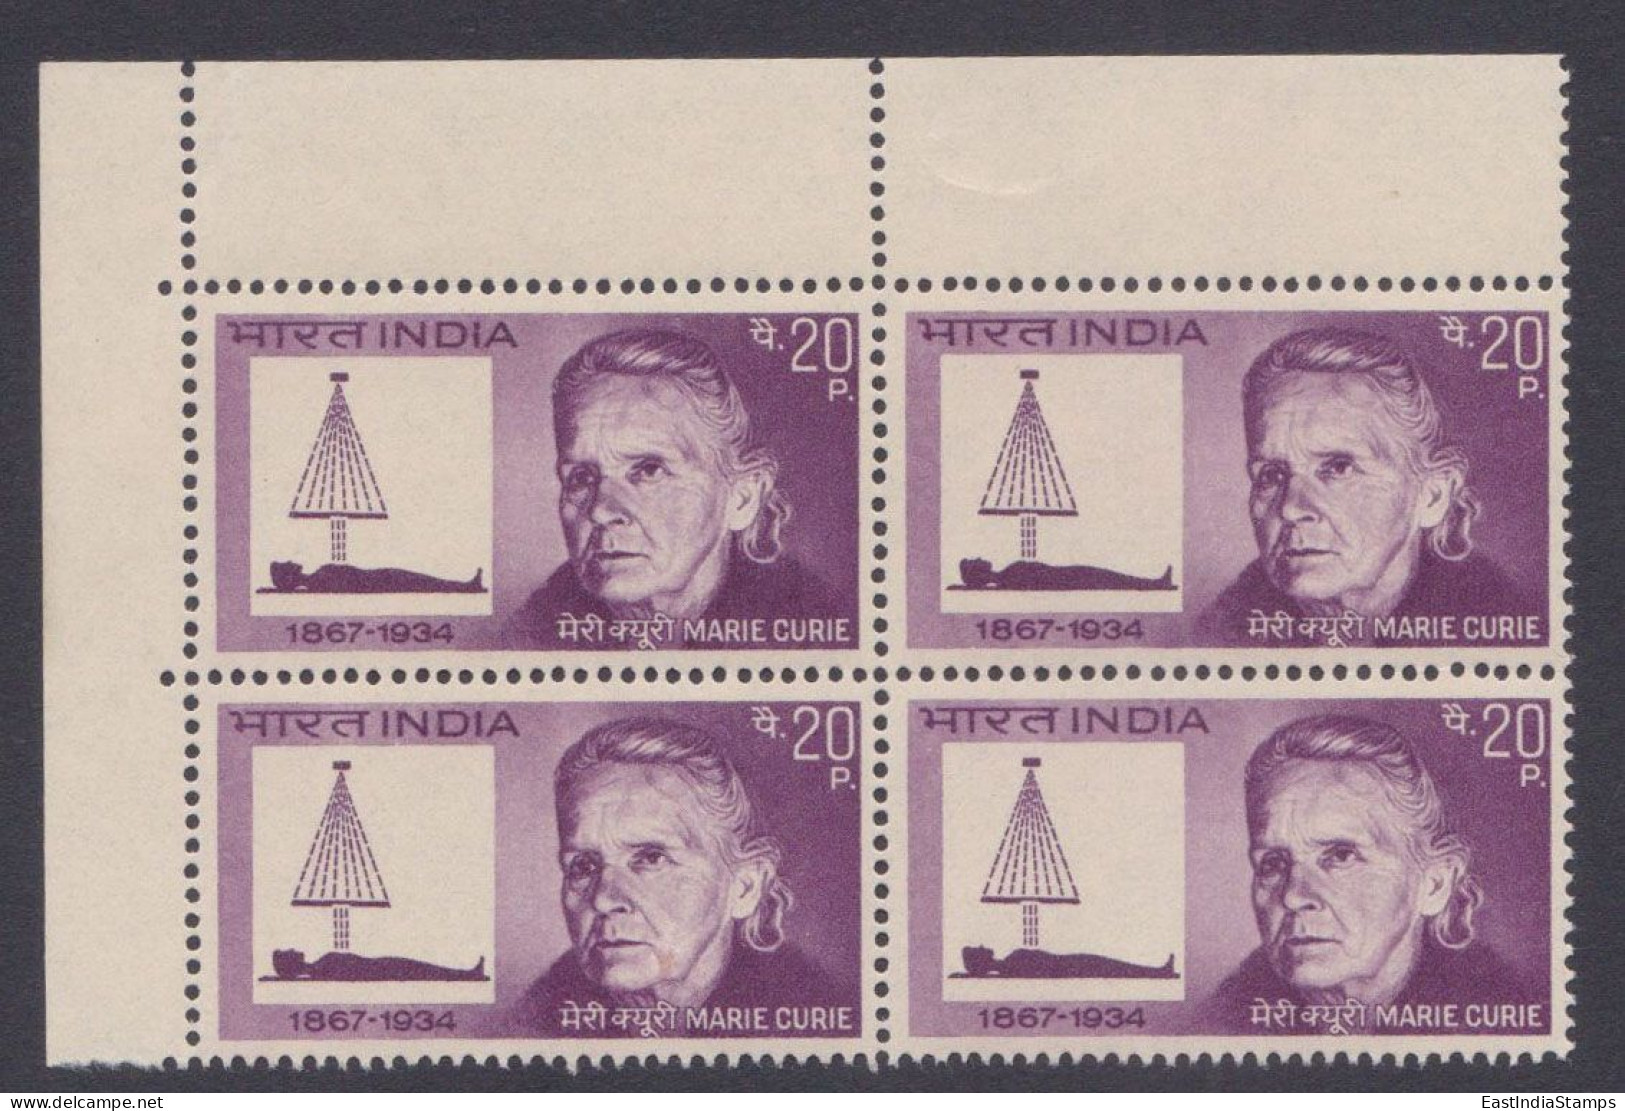 Inde India 1968 MNH Marie Curie, Polish French Chemist, Physicist, Nobel Prize Winner, Science, Scientist, Physics Block - Ungebraucht